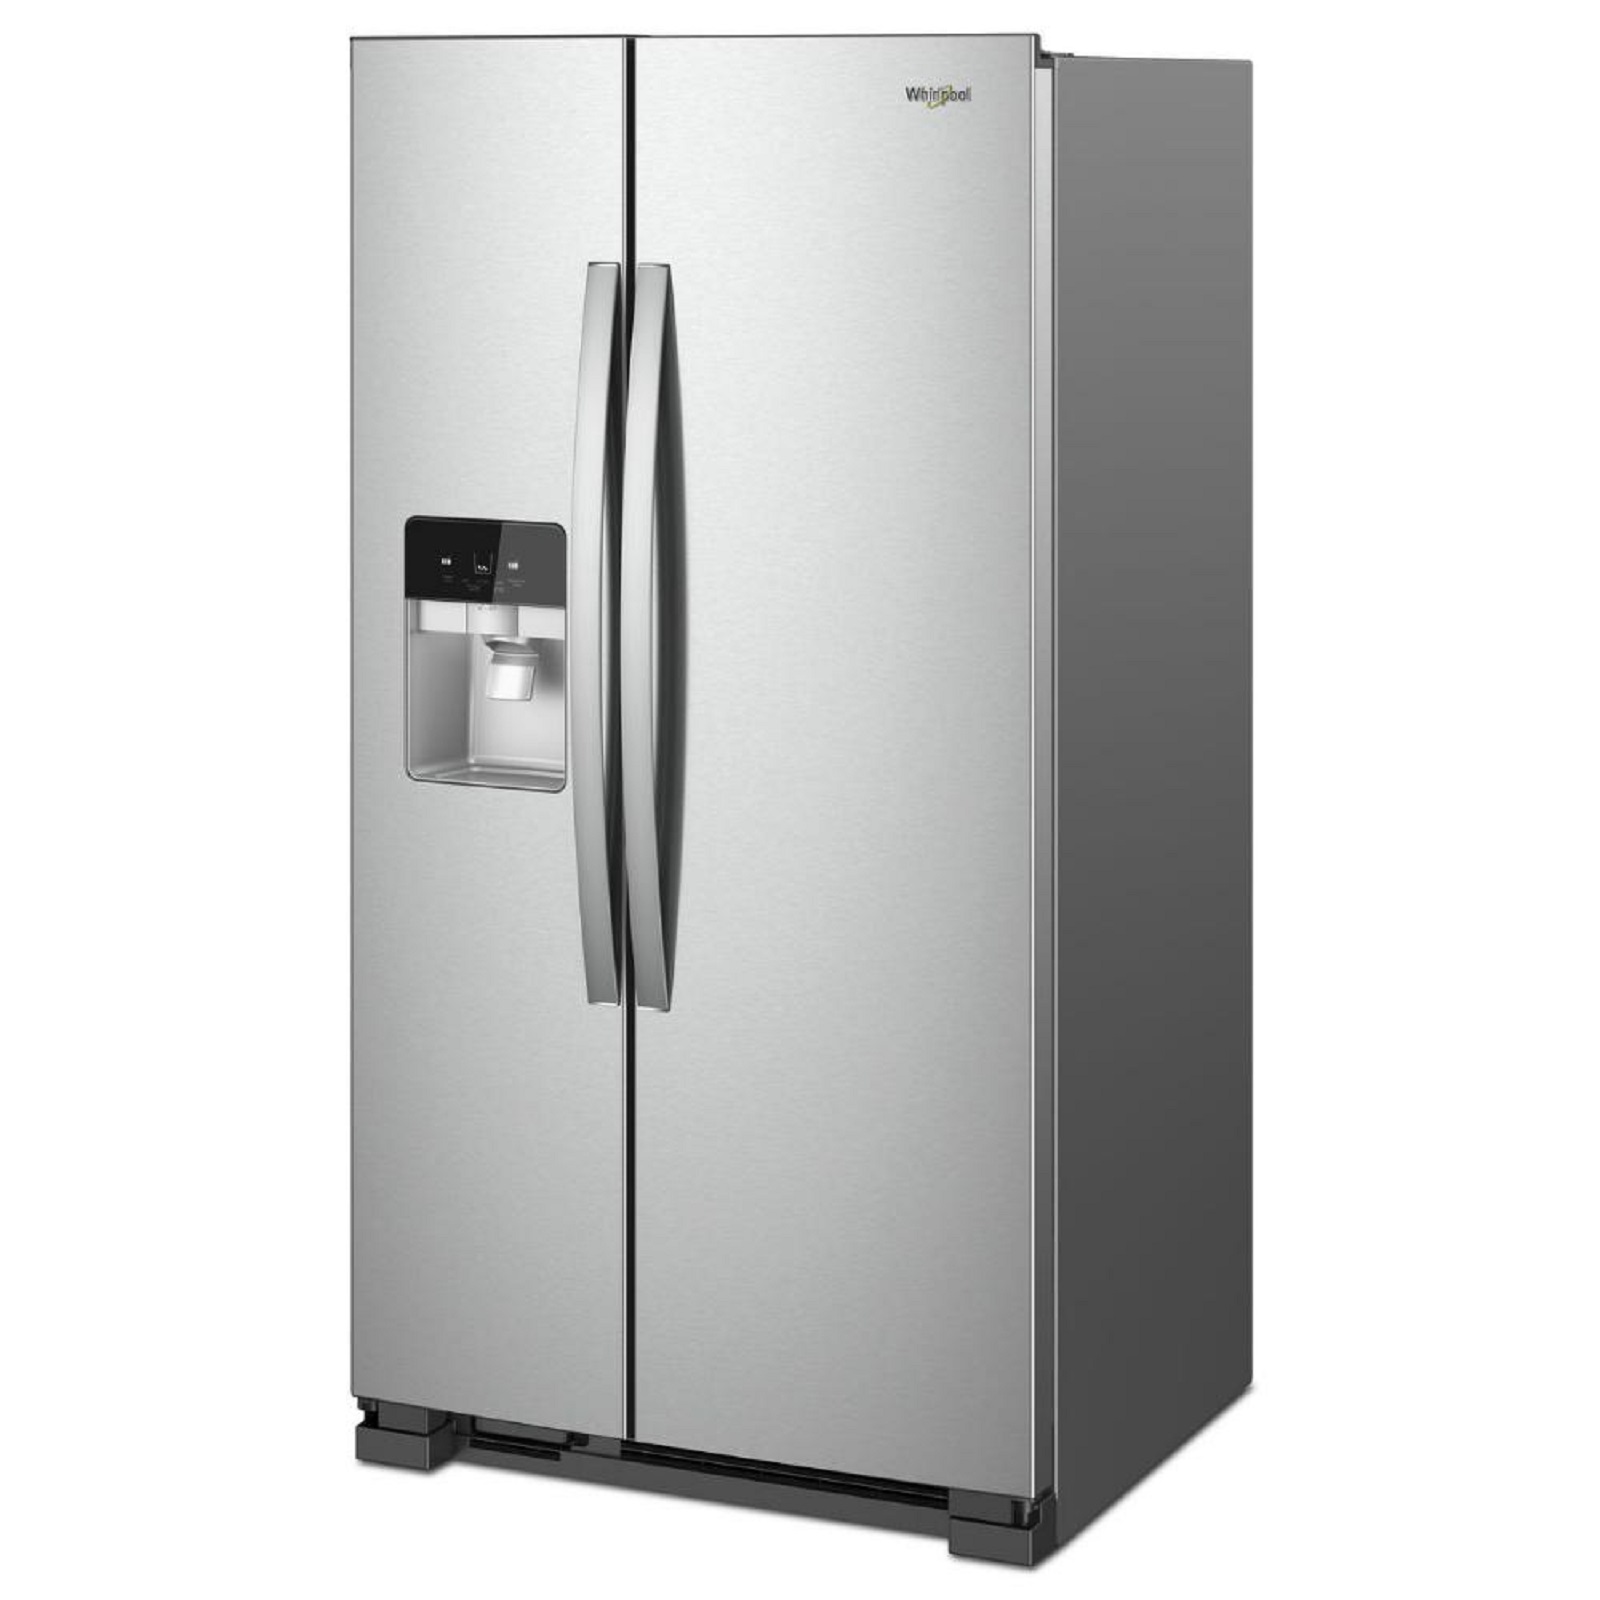 Whirlpool WRS325SDHZ 24.6 Cu. Ft. Side-by-Side Refrigerator - Stainless Whirlpool Refrigerator Side By Side Stainless Steel